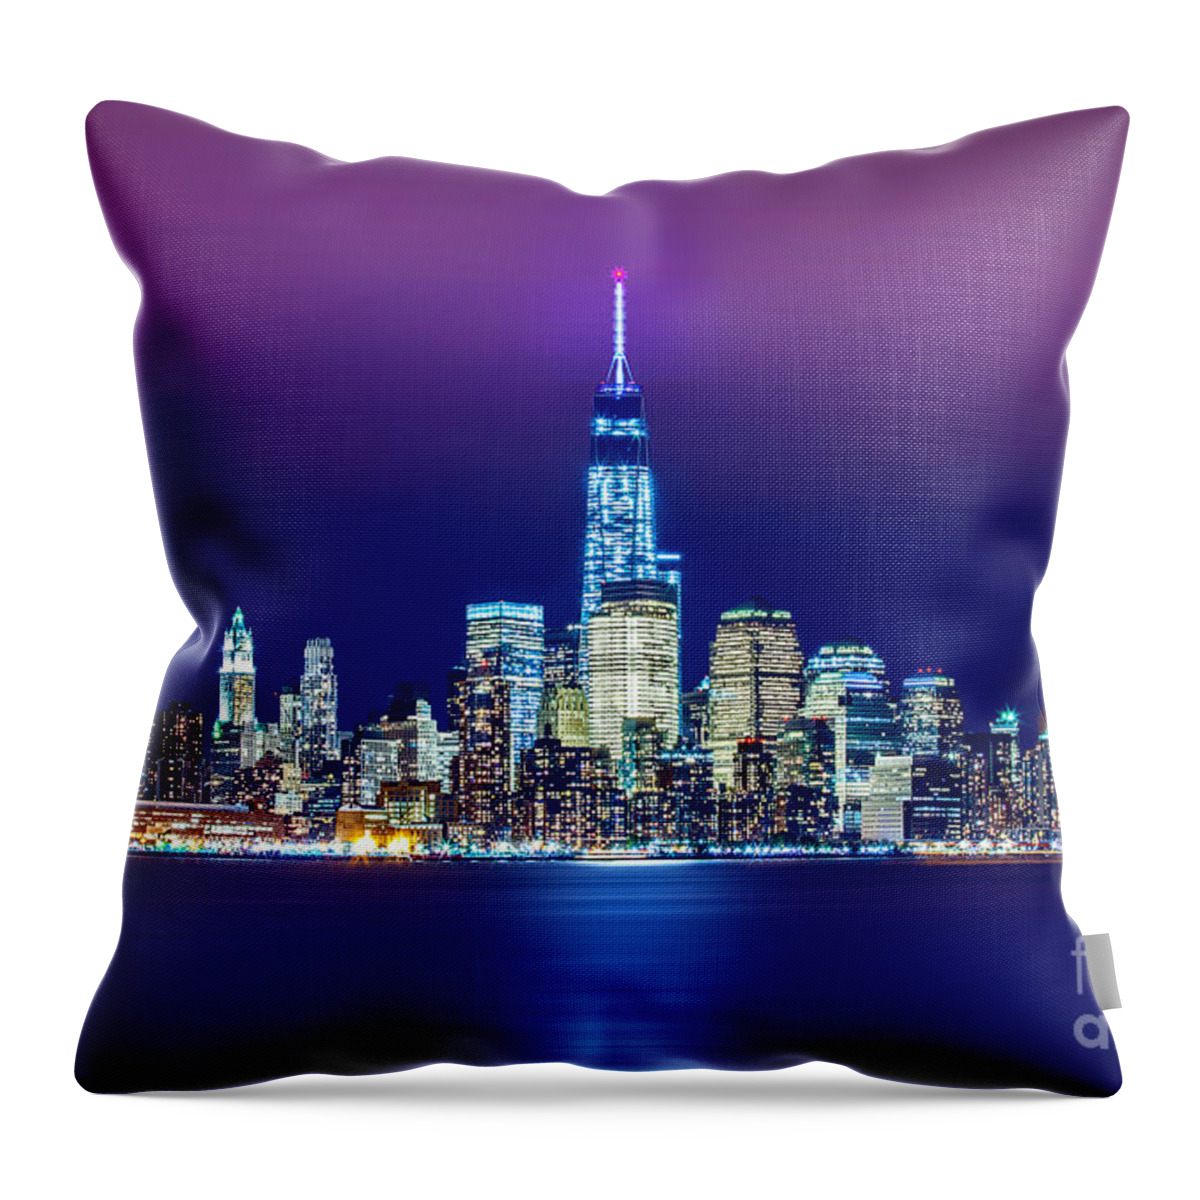 New Throw Pillow featuring the photograph All That Glitters by Az Jackson